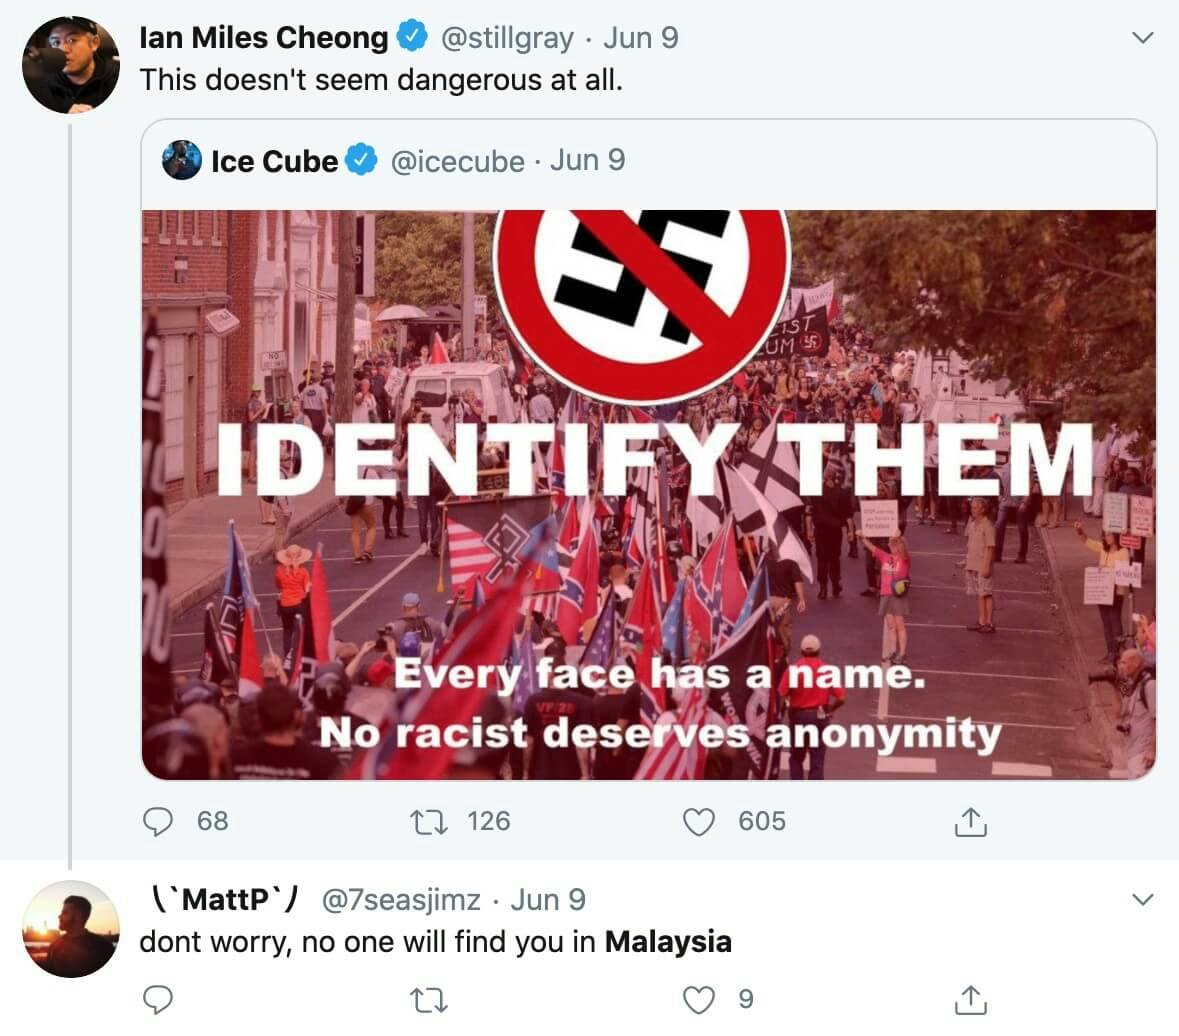 A reply to a political tweet from Ian Miles Cheong saying he won't have to worry about it in Malaysia